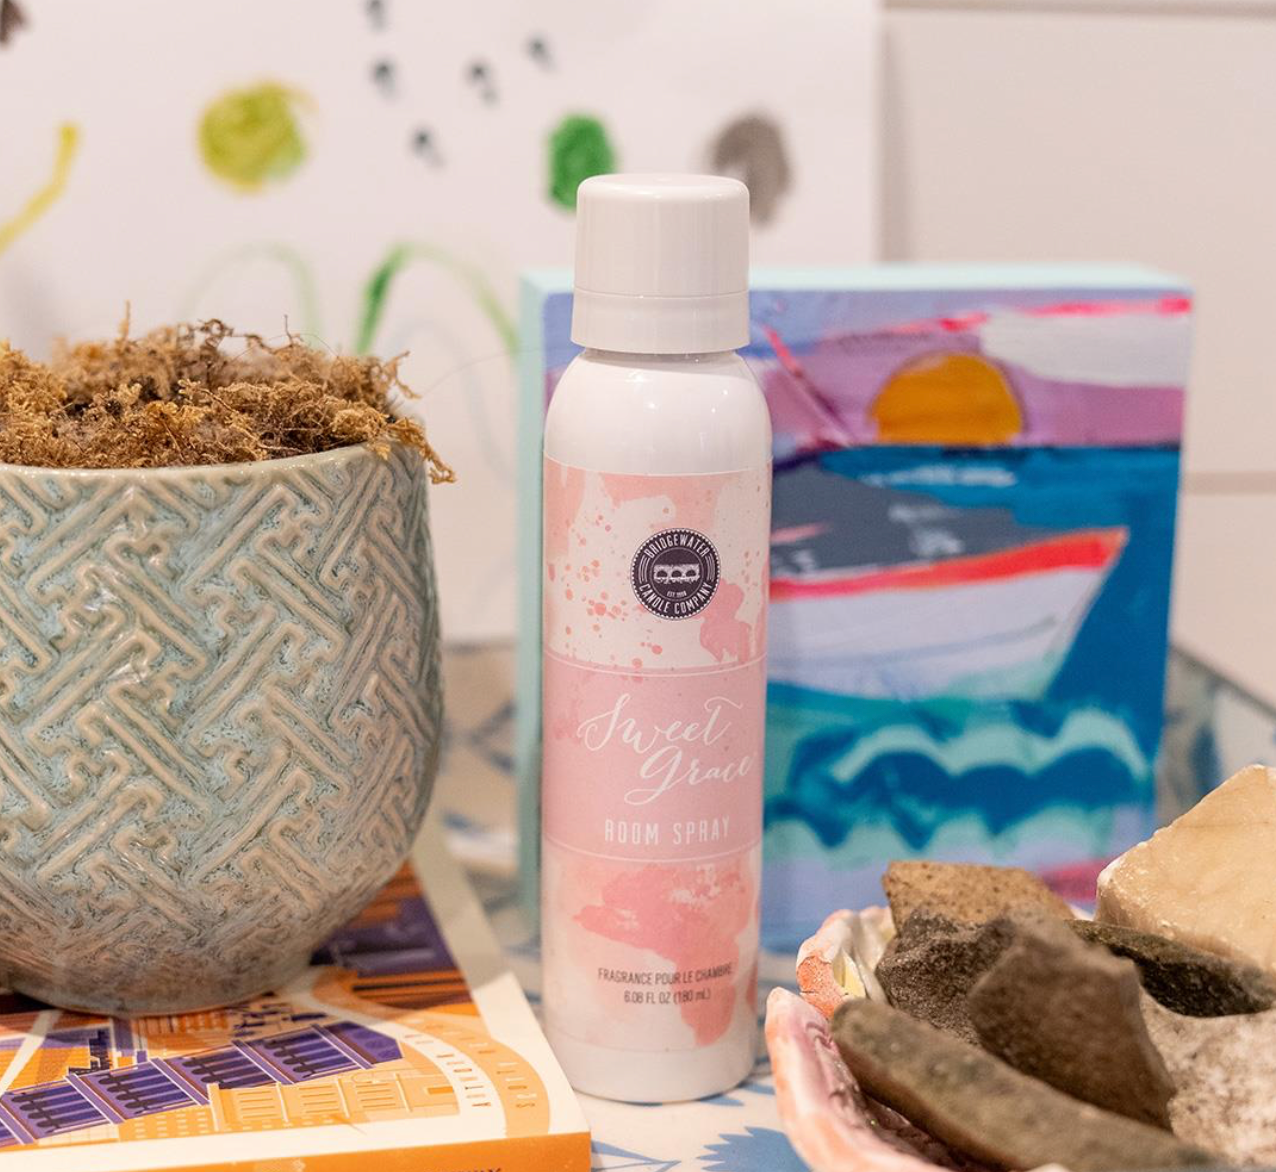 Sweet Grace Room Spray – The Drug Store Gifts & Boutique